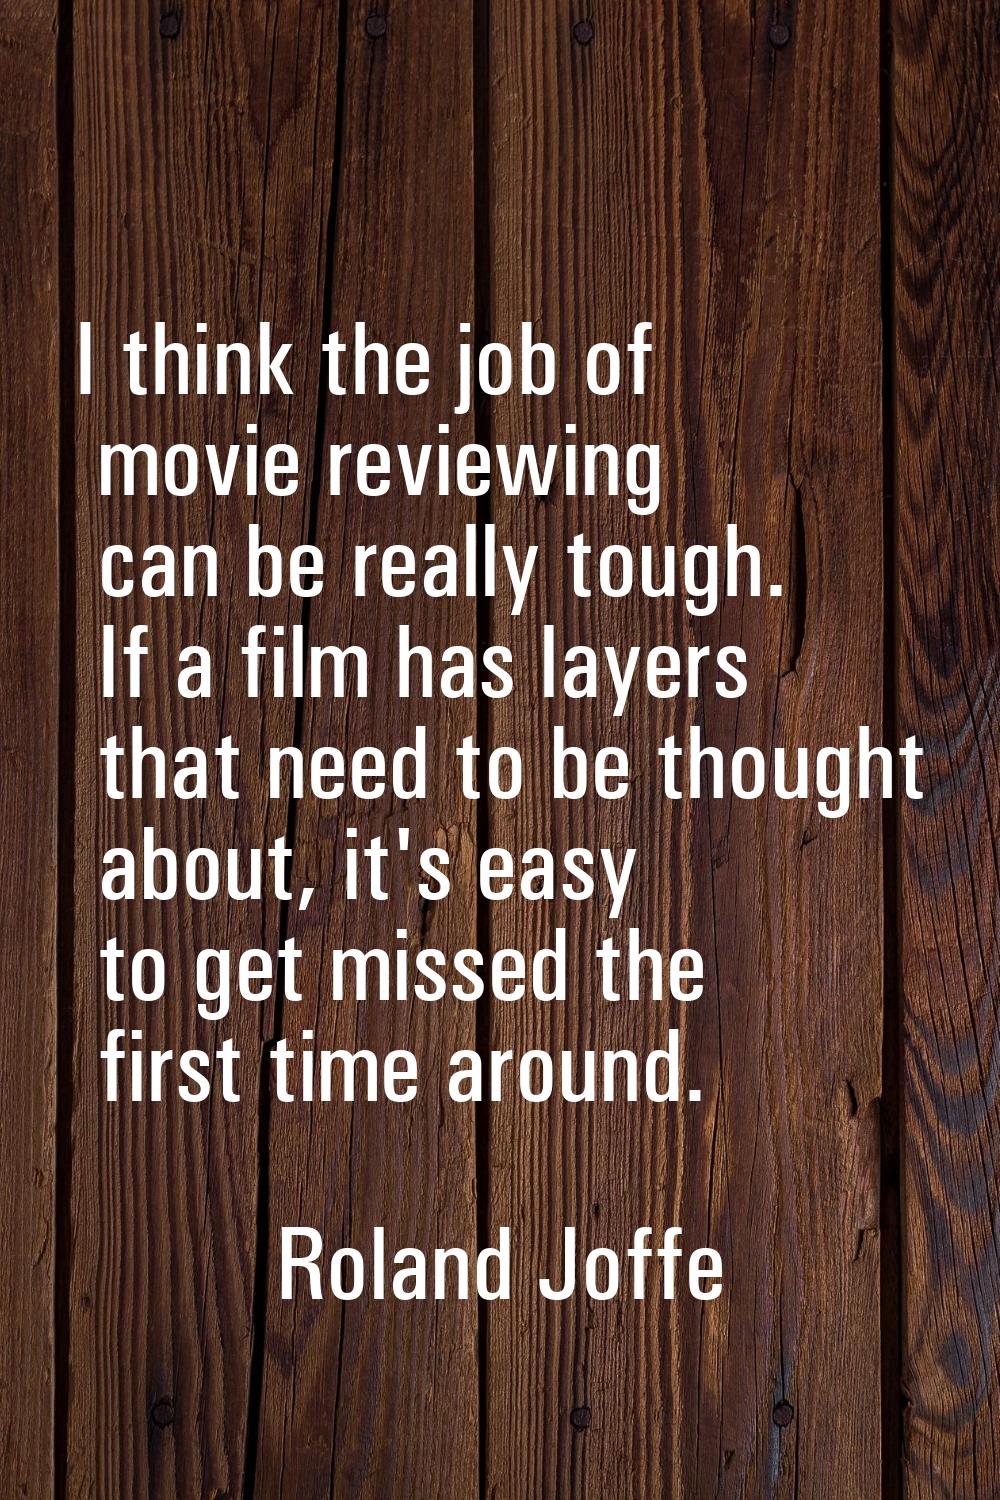 I think the job of movie reviewing can be really tough. If a film has layers that need to be though